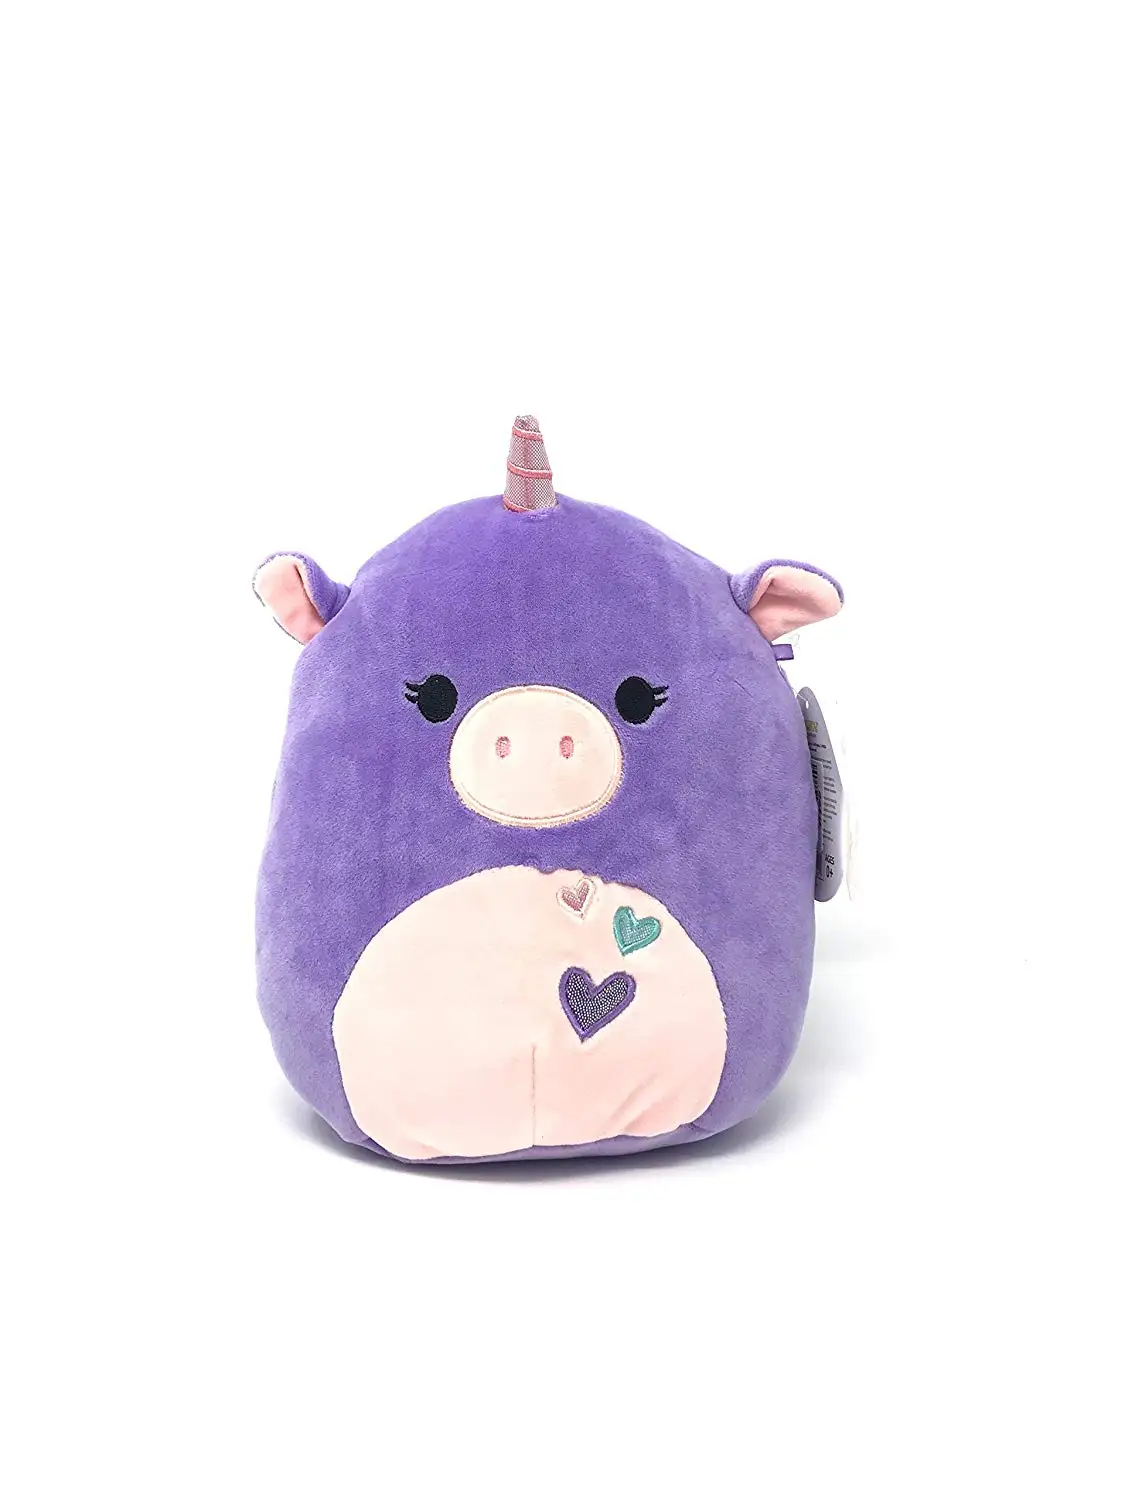 Buy Magical Unicorn Purple Valentines Day Plush 16 In Cheap Price On Alibaba Com Download our custom coloring sheets to show off your artistic skills and have fun with the squishmallows squad. buy magical unicorn purple valentines